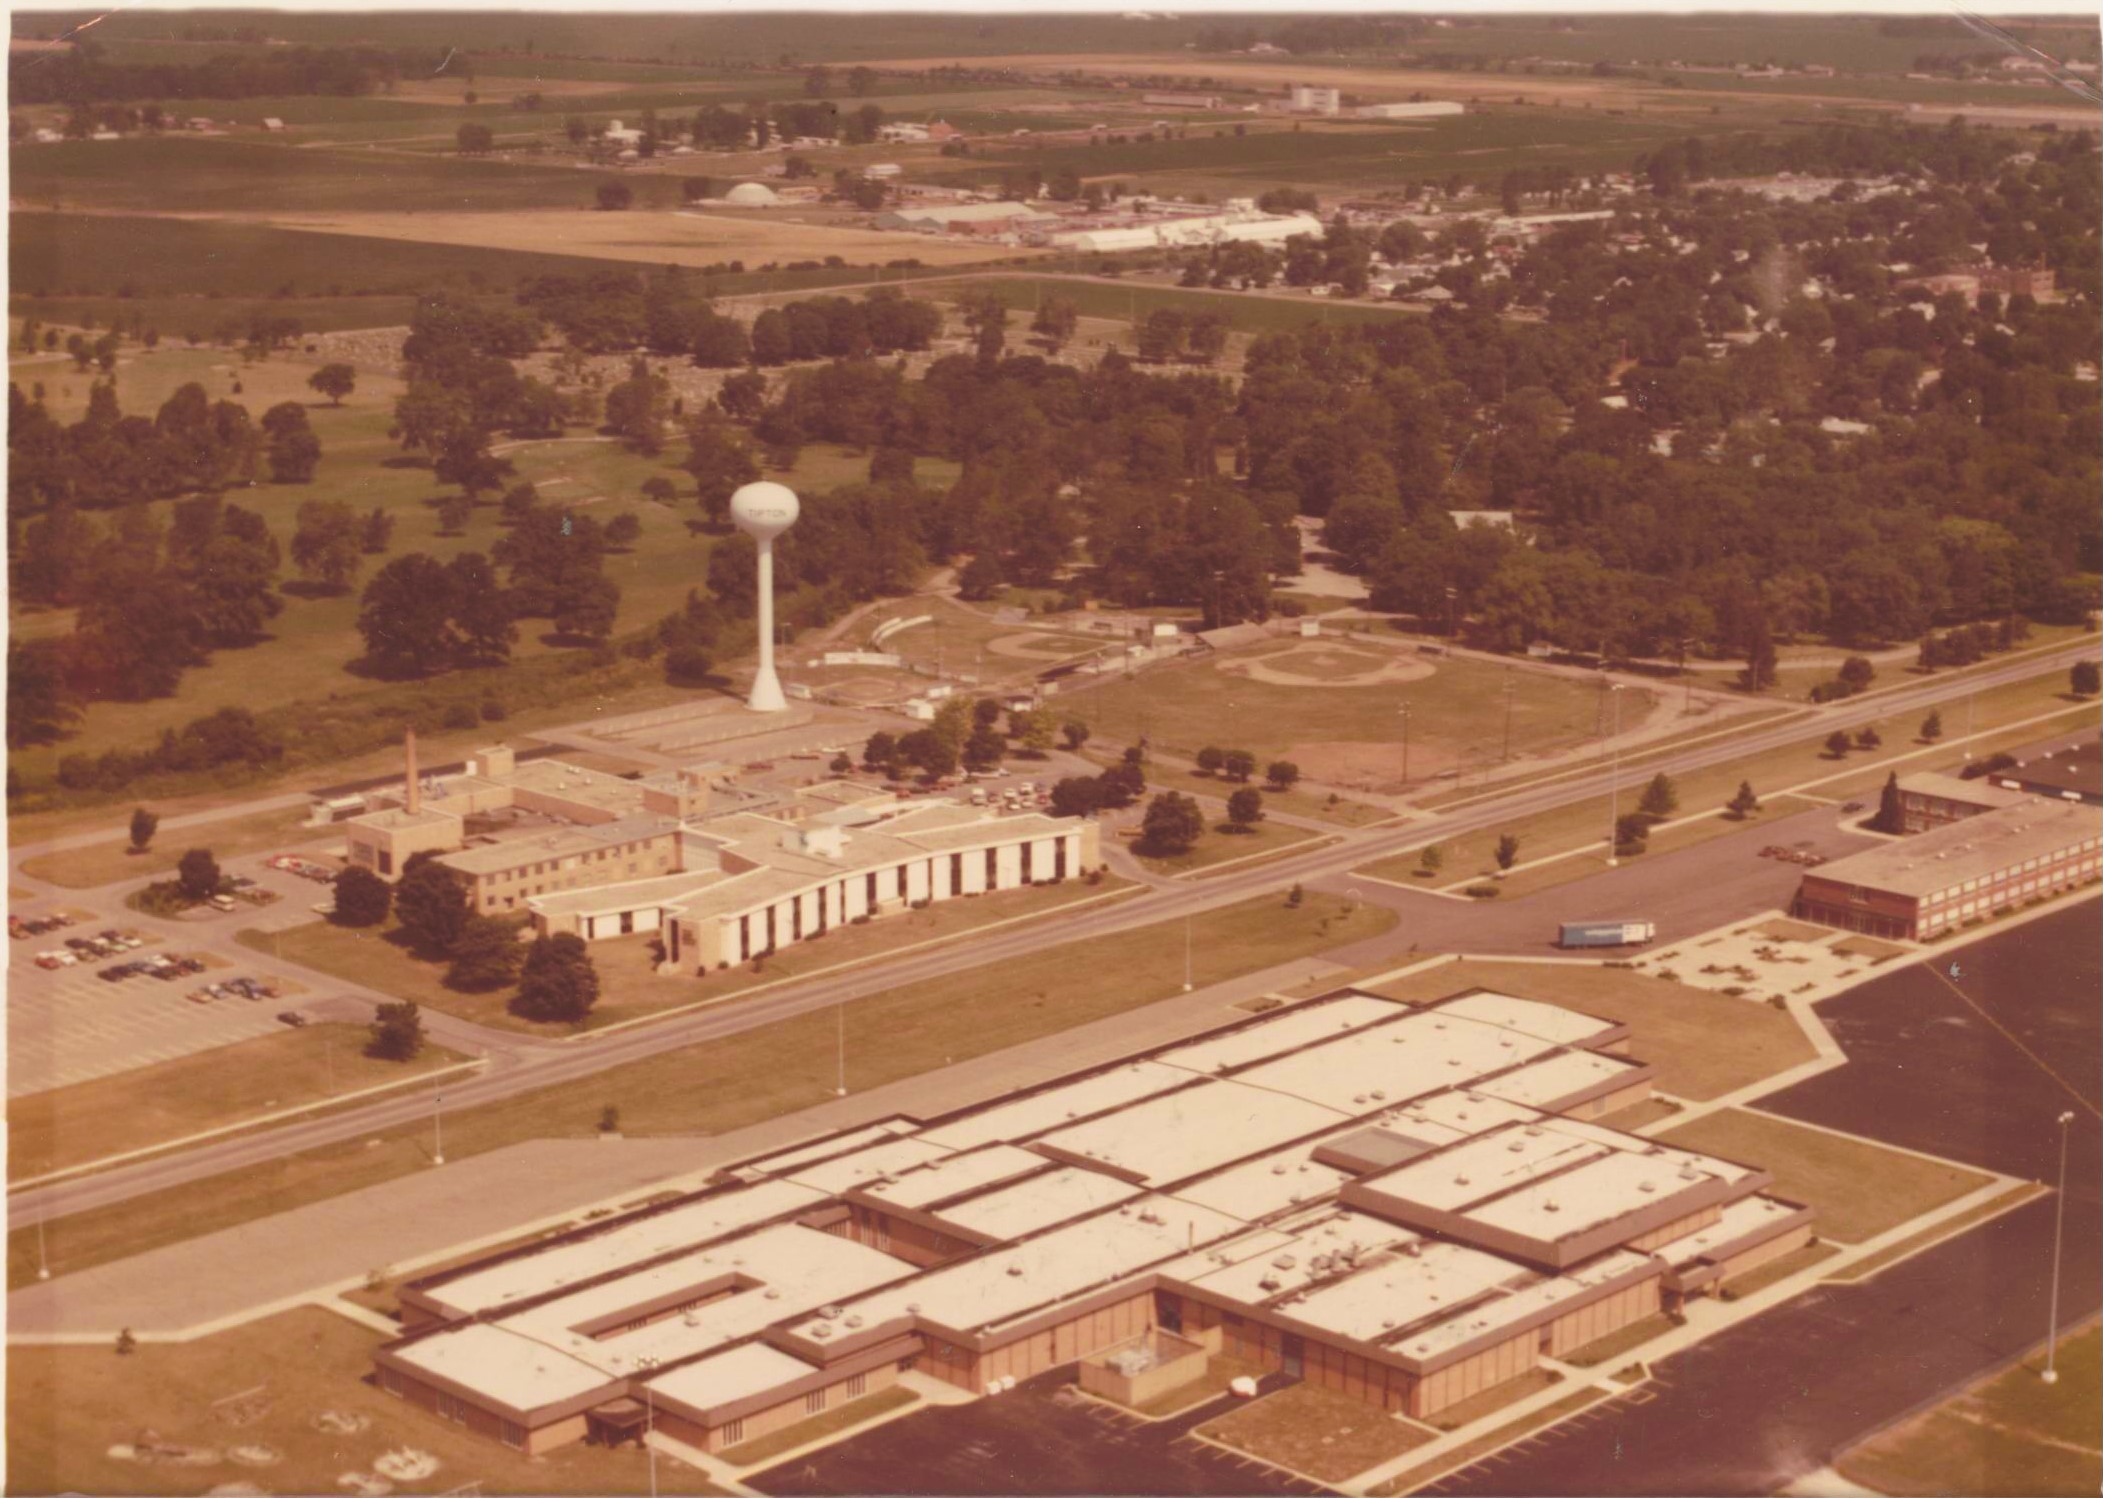 Sepia-tone, aerial view of Tipton Middle School and Washington Elementary School. Farmland is seen in the background.